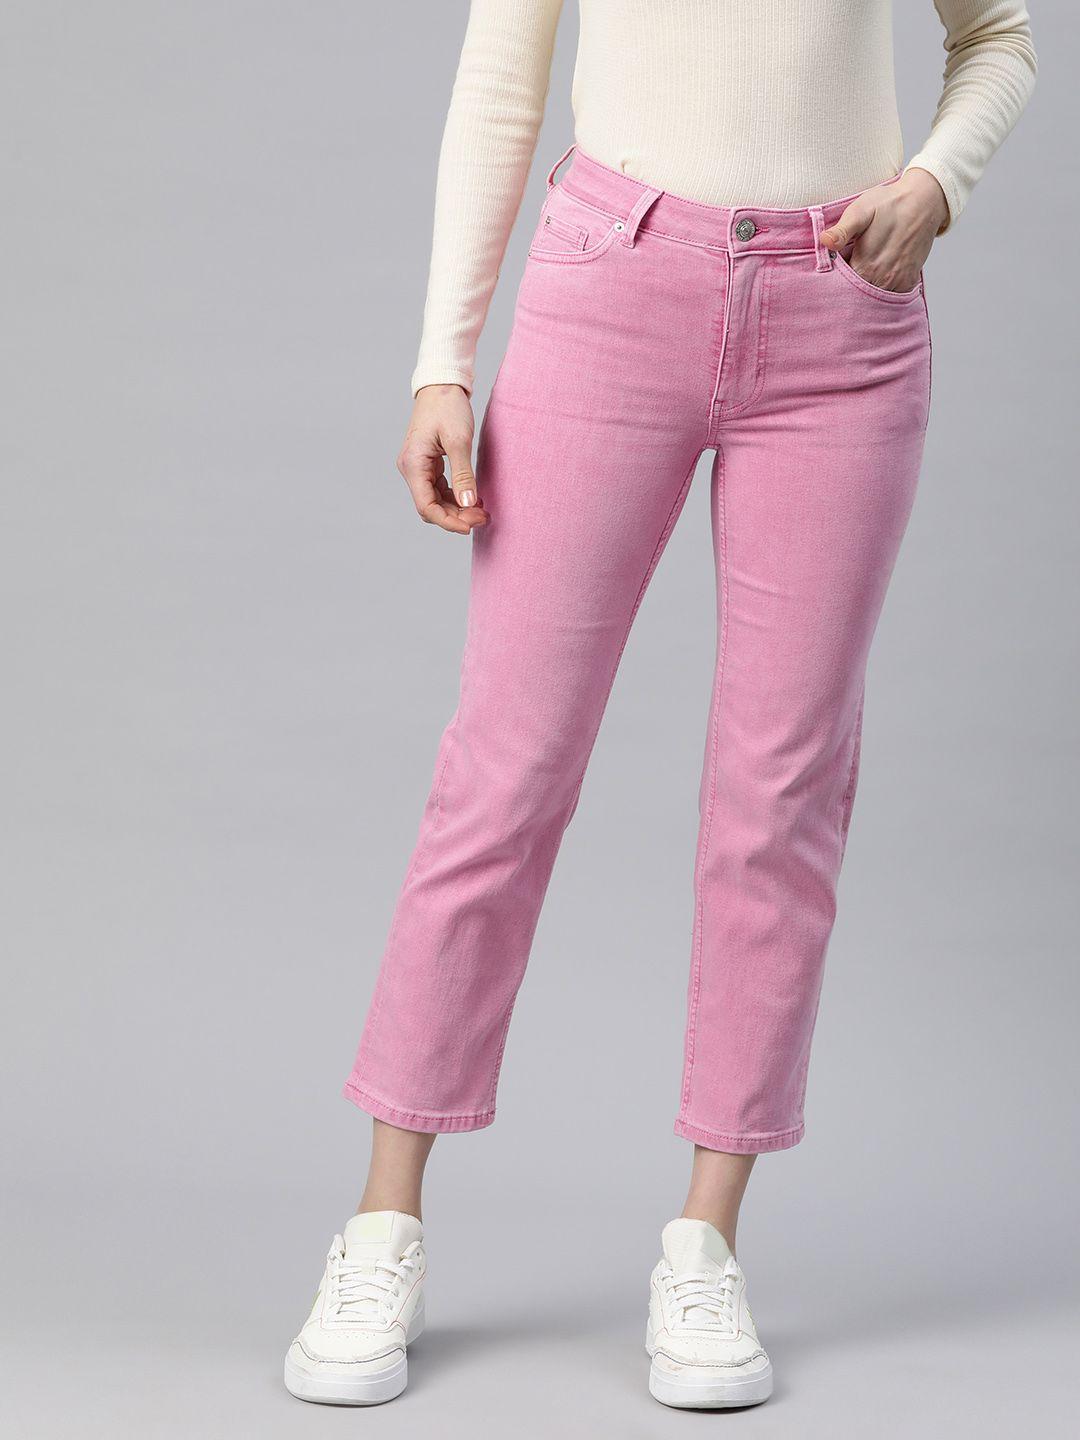 Marks & Spencer Women High-Rise Stretchable Jeans